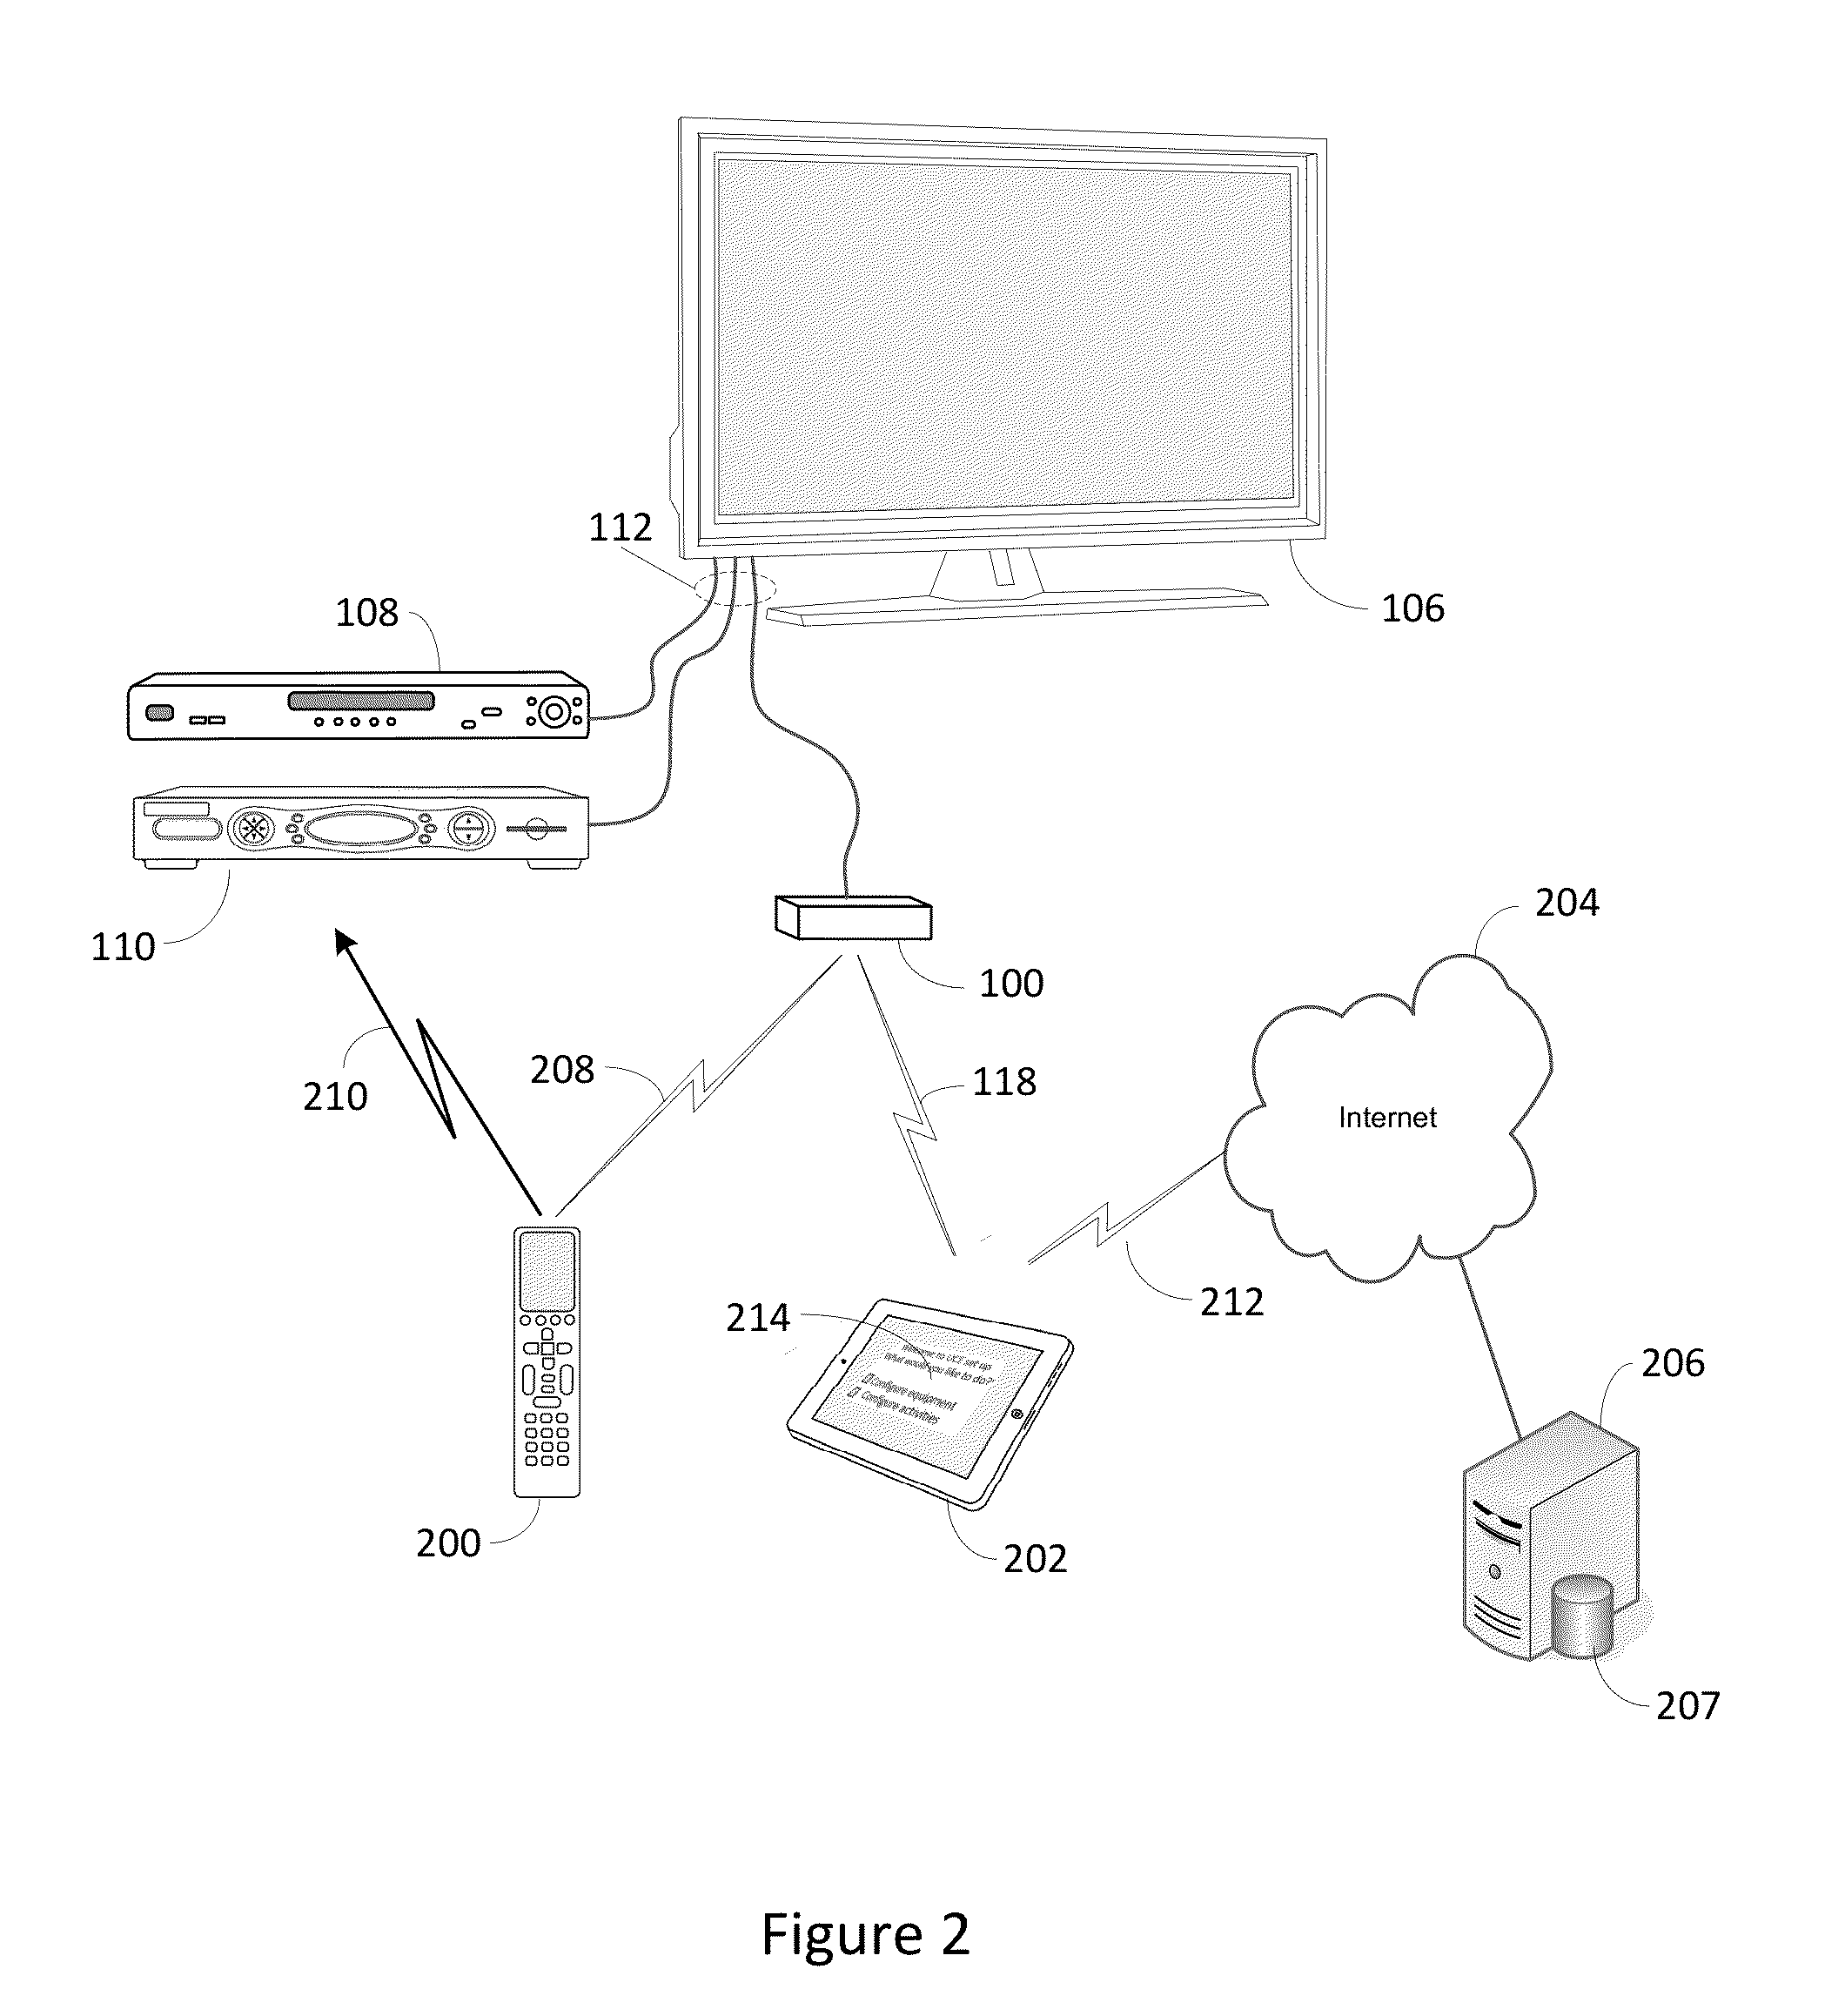 System and method for optimized appliance control